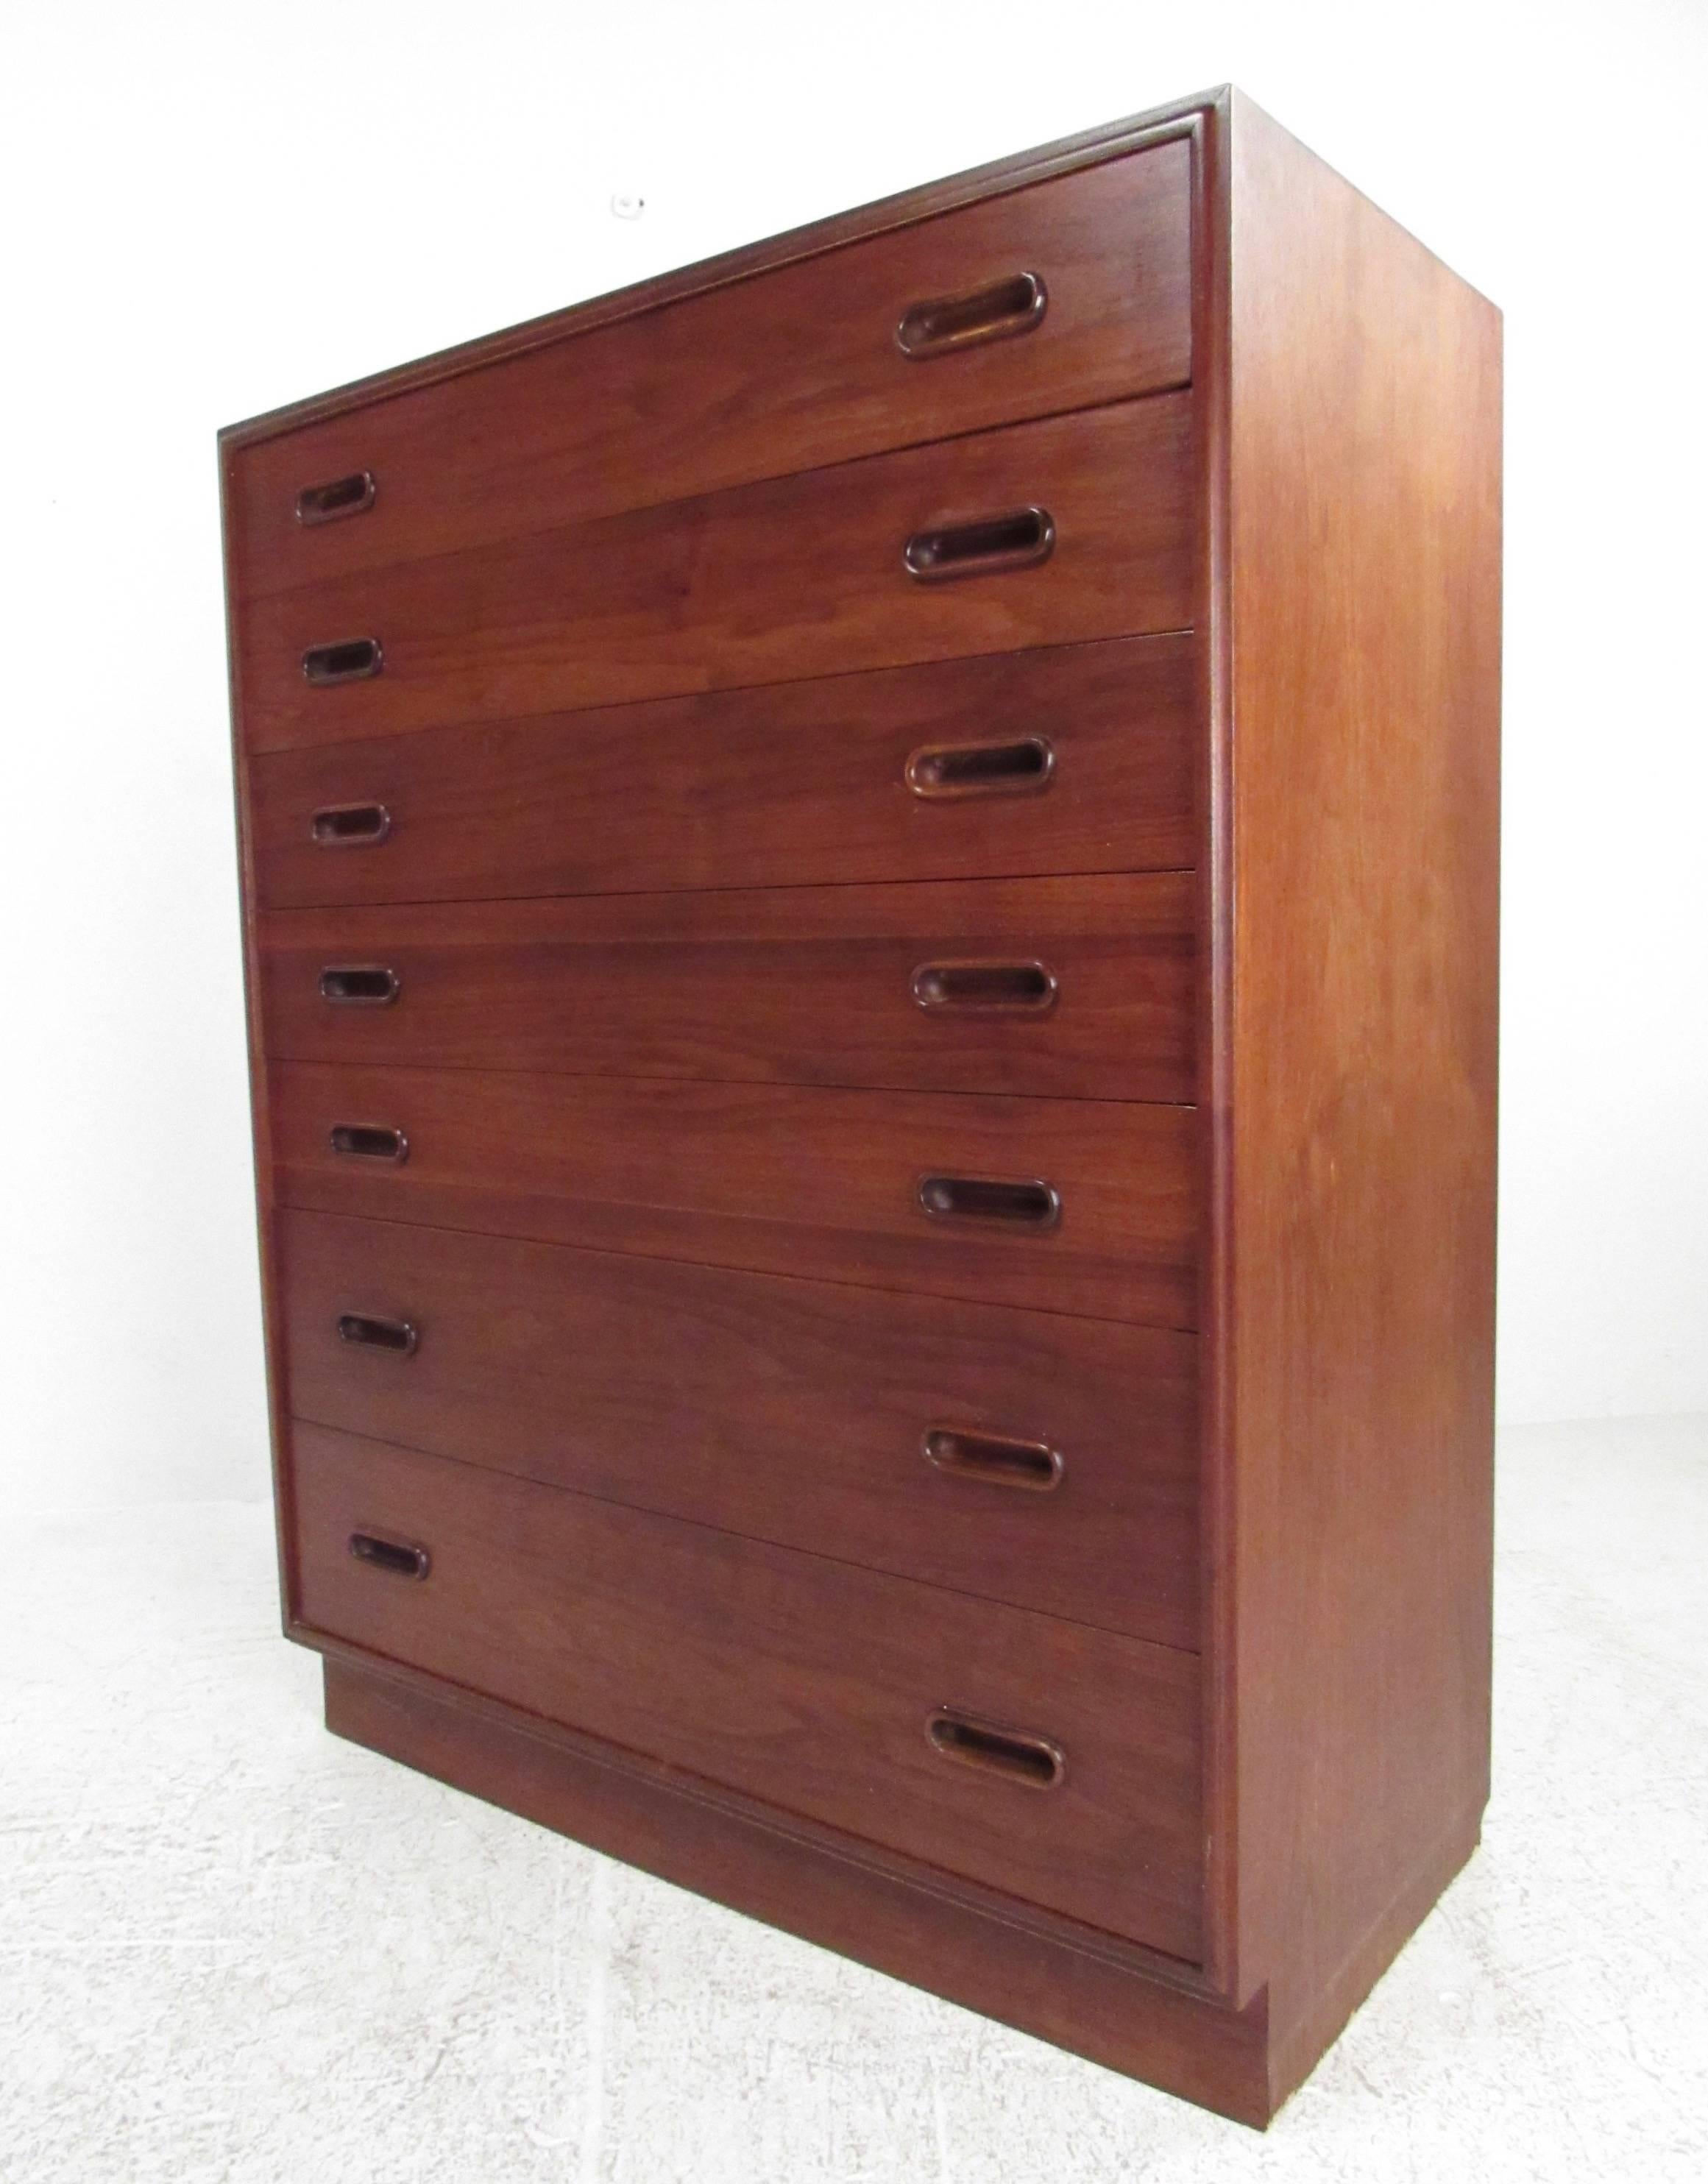 This stylish Scandinavian Modern dresser features seven graduated drawers for storage, dovetail construction, and rich vintage finish. Classic Mid-Century design makes this chest of drawers the perfect addition to any interior. Please confirm item